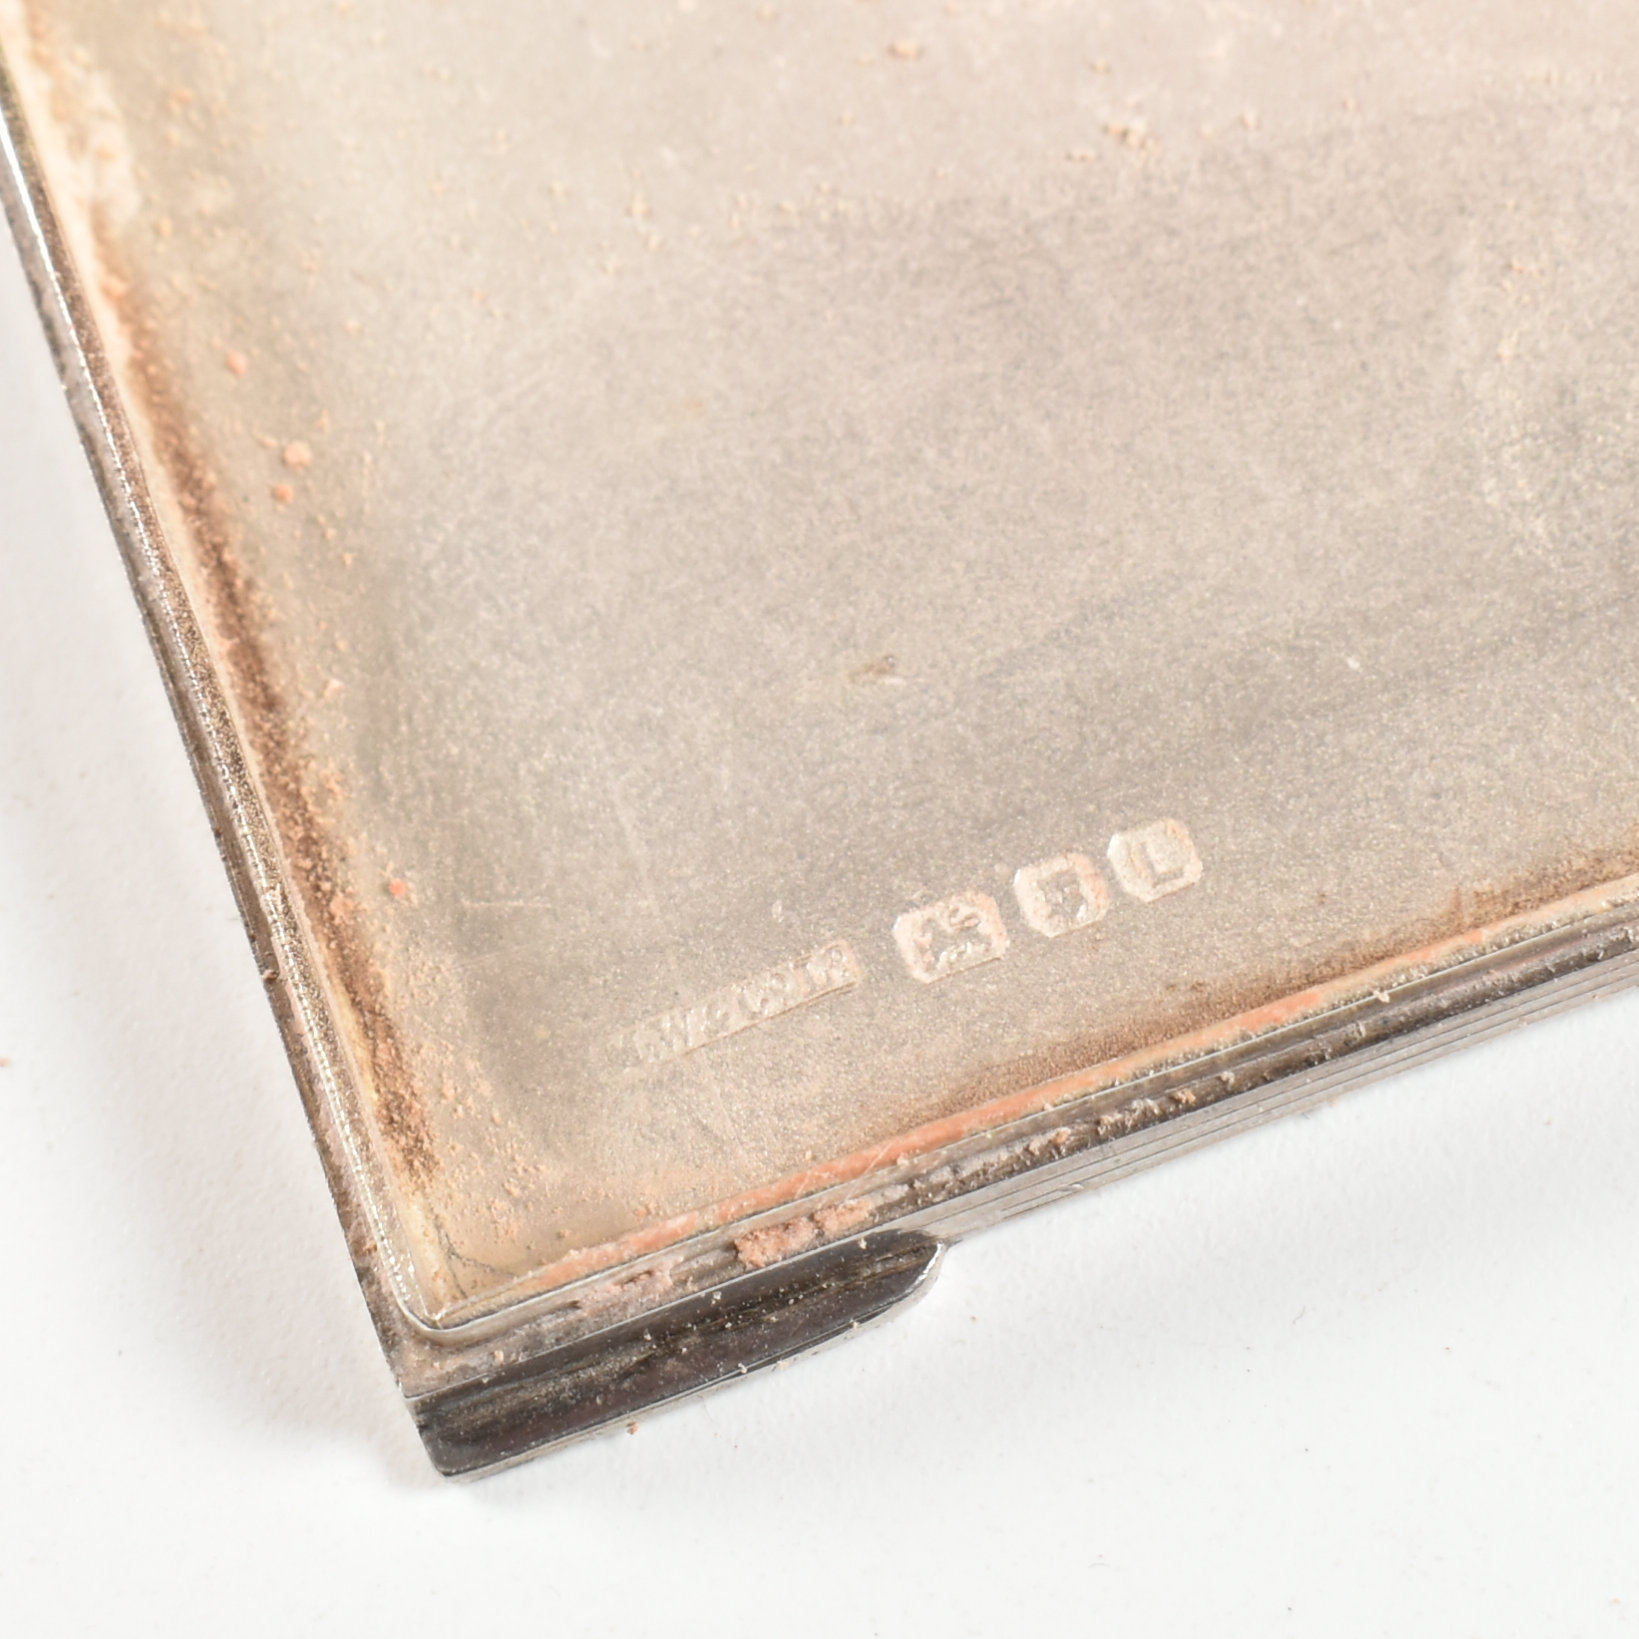 GEORGE VI HALLMARKED SILVER COMPACT - Image 7 of 8